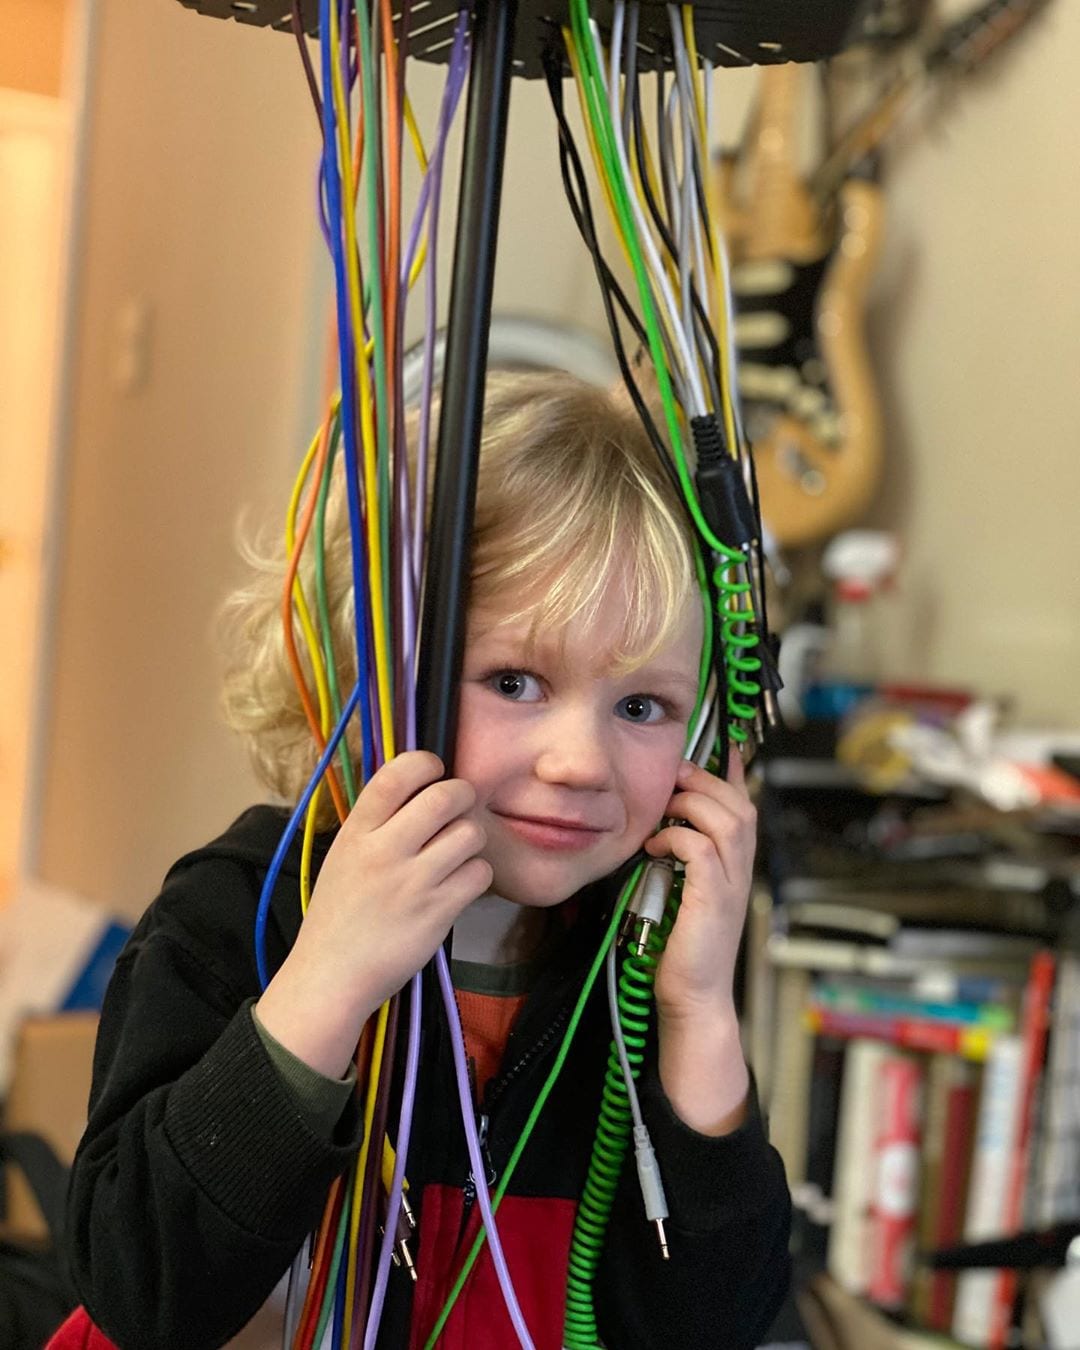 I got some help organizing my cables today. ❤️ @eurodeskz